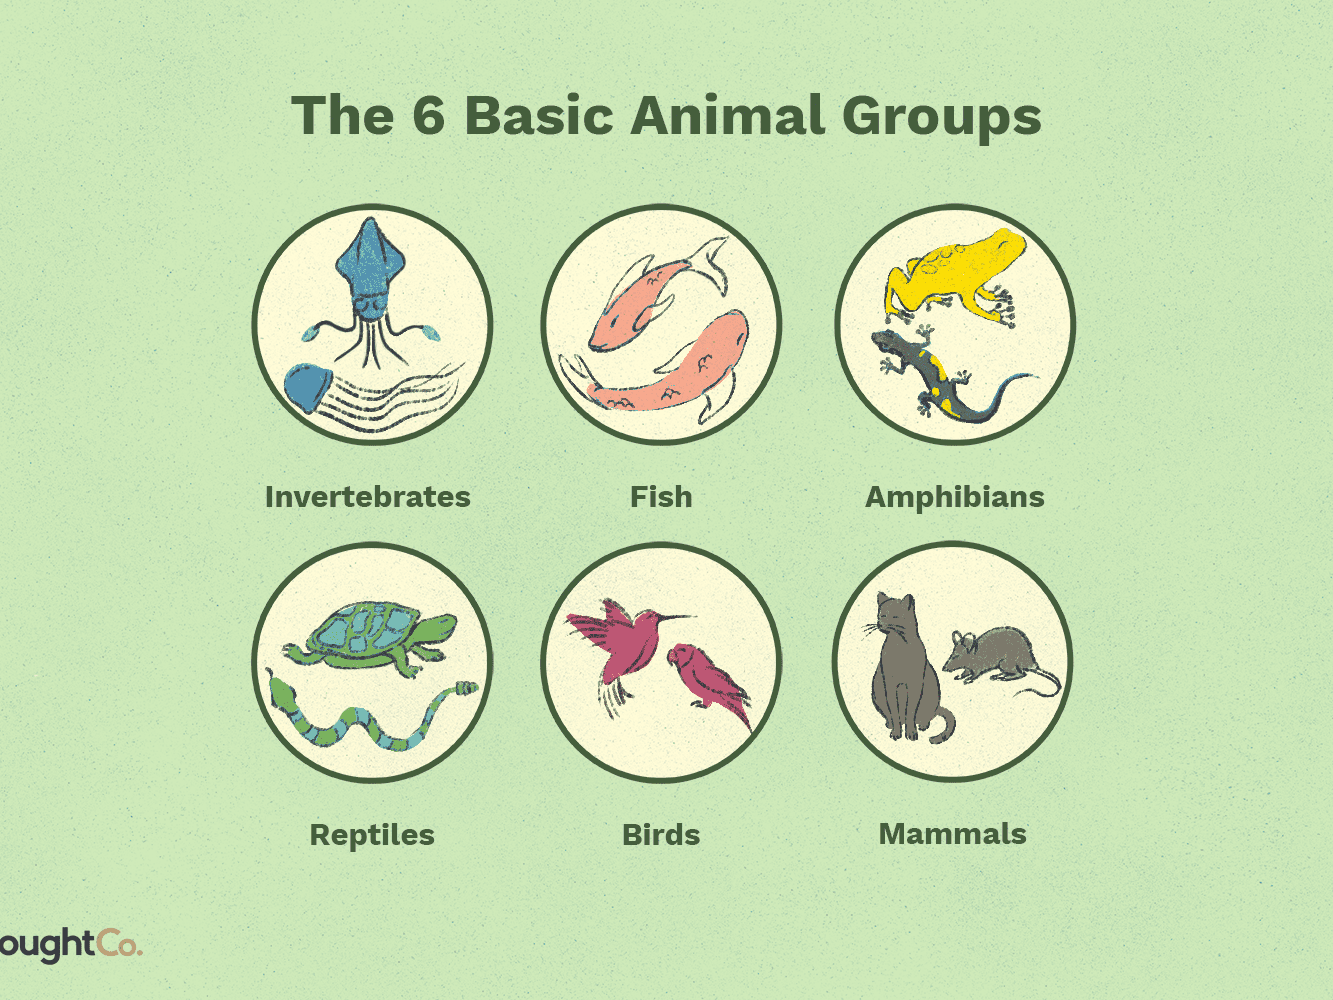 What are the 5 main groups of animals?